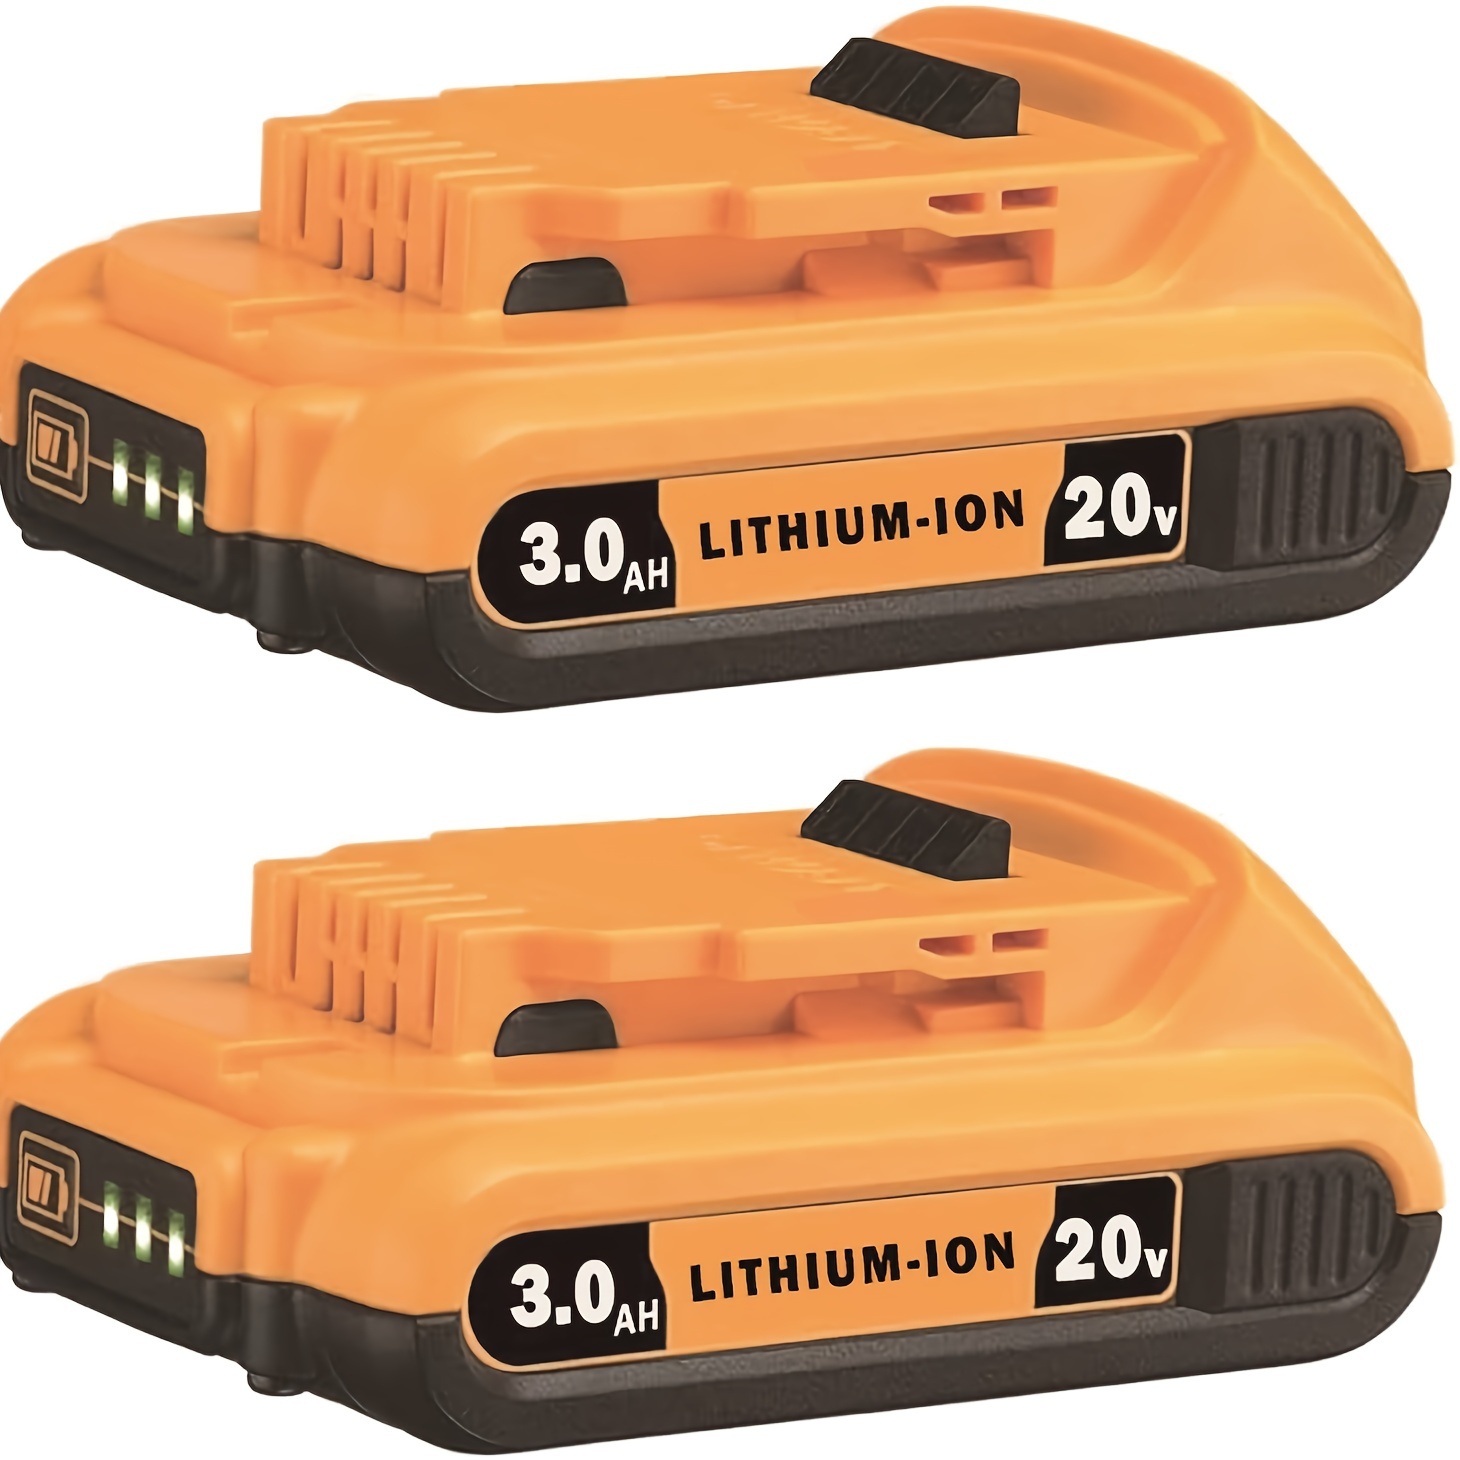 

Replace For 20v Max Battery Pack, 3.0-ah, 2-pack, Compatible With Dcb200 Dcd Dcf Dcg Series Cordless Power Tools